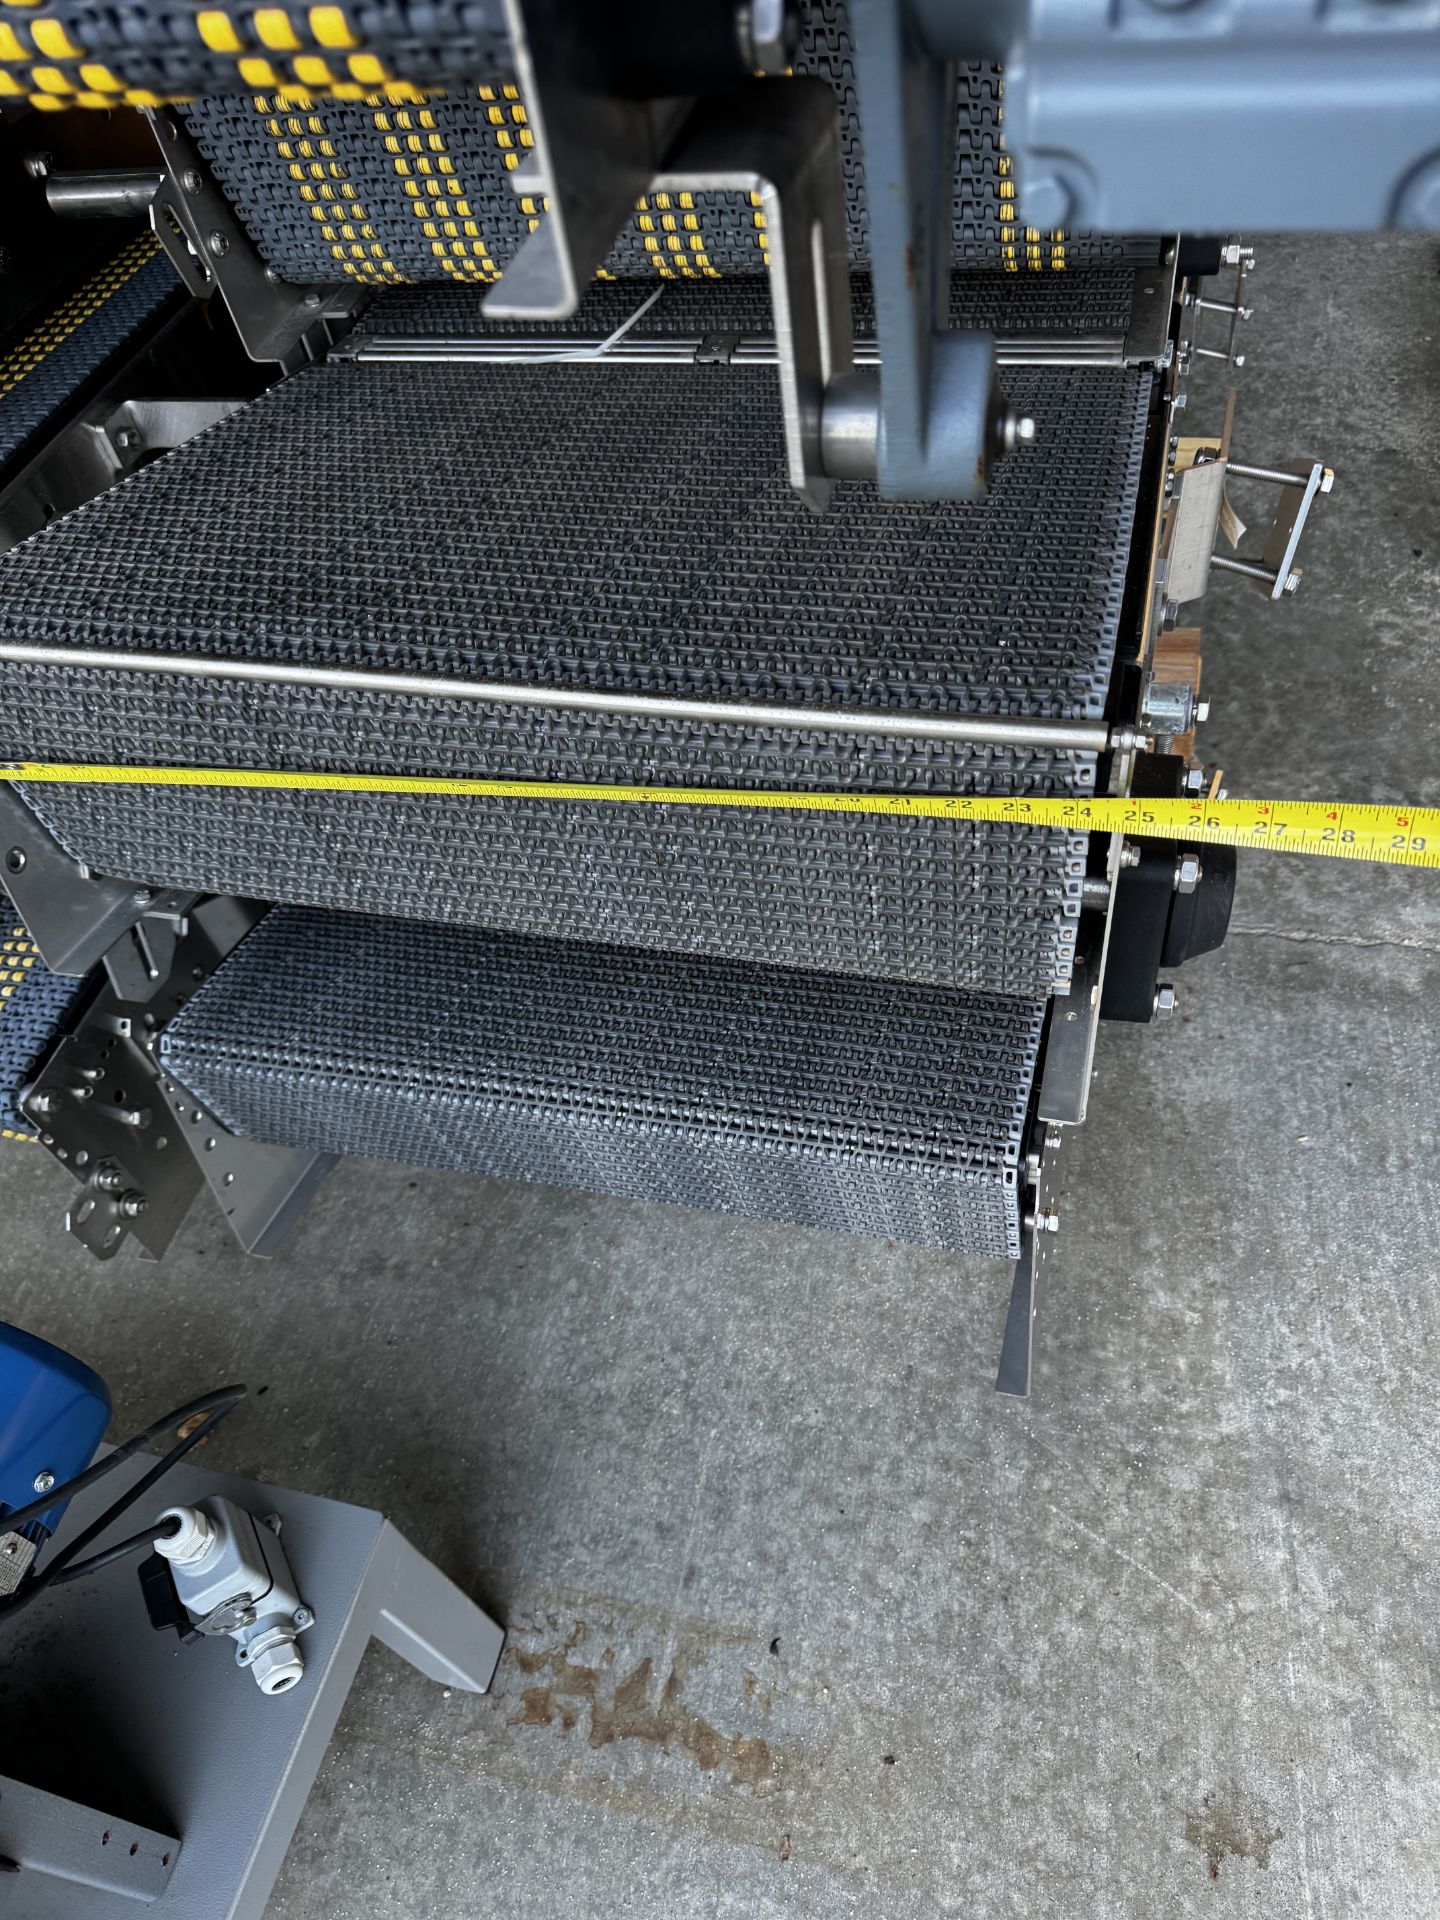 2018 SMI 24in Stainless Steel Case Conveyor, 200+ft - Image 3 of 4